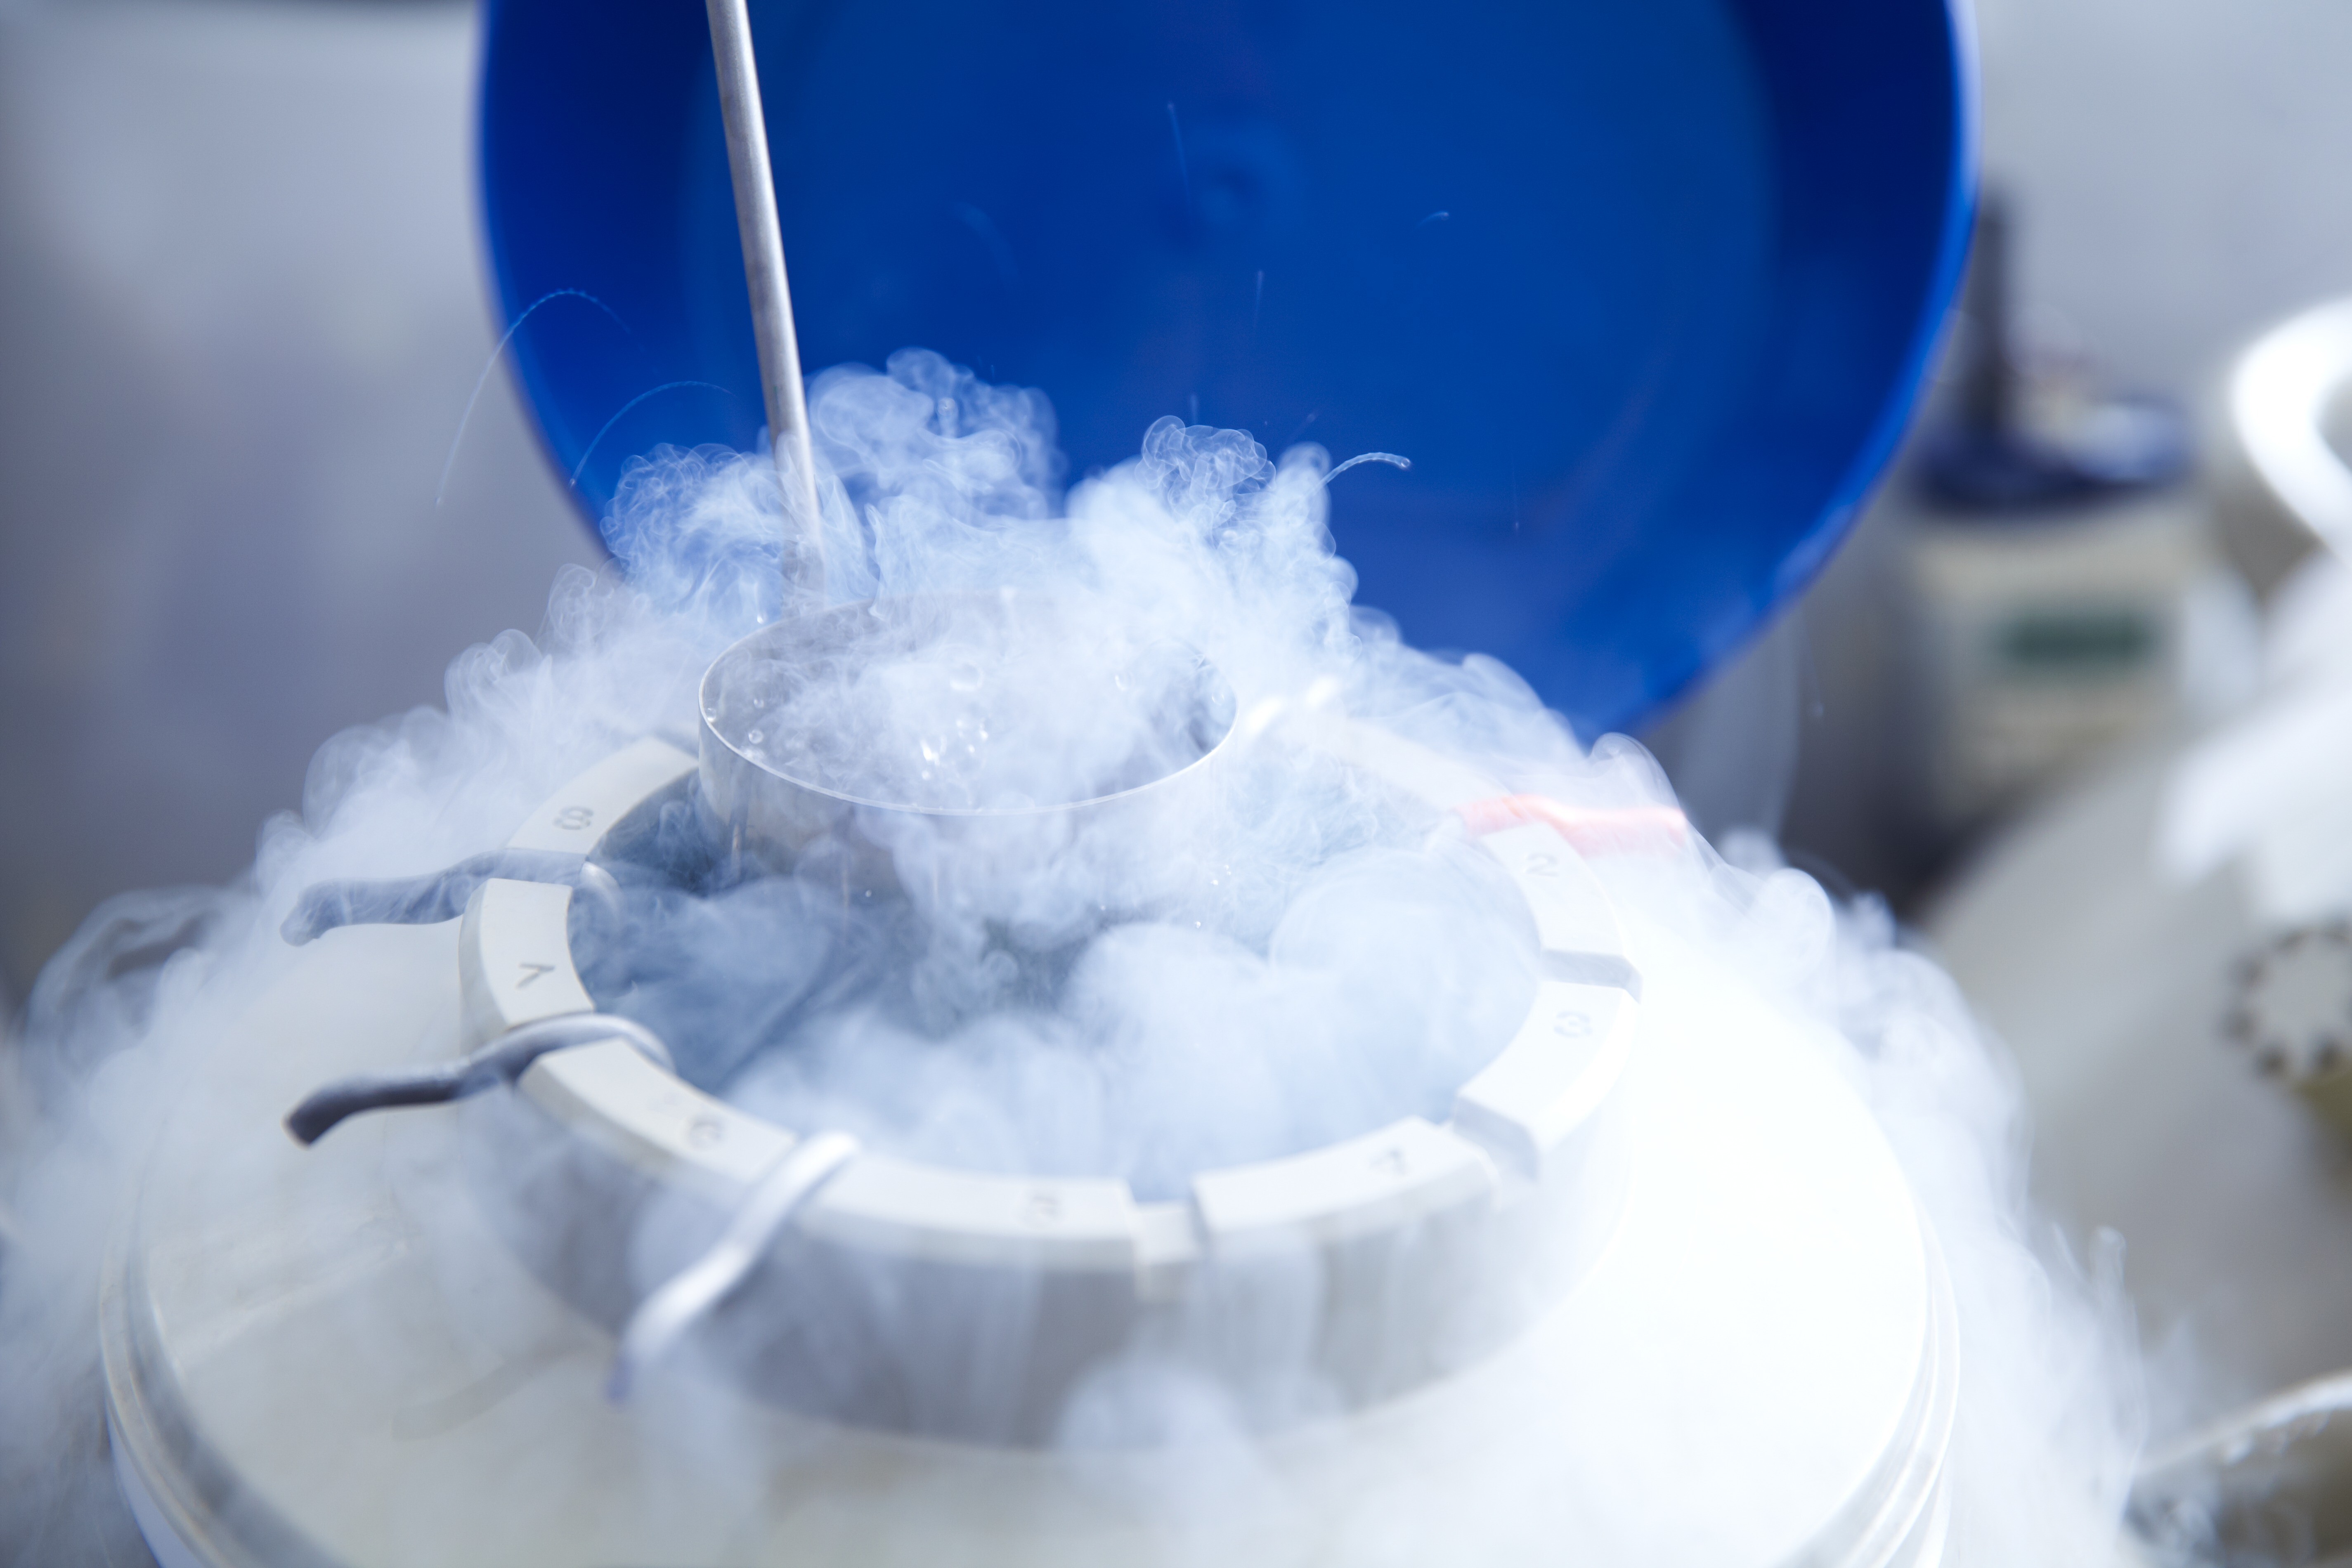 A woman’s eggs are placed in cryogenic (frozen) storage. More Indian women are seeking this option to delay motherhood. Photo: Getty Images